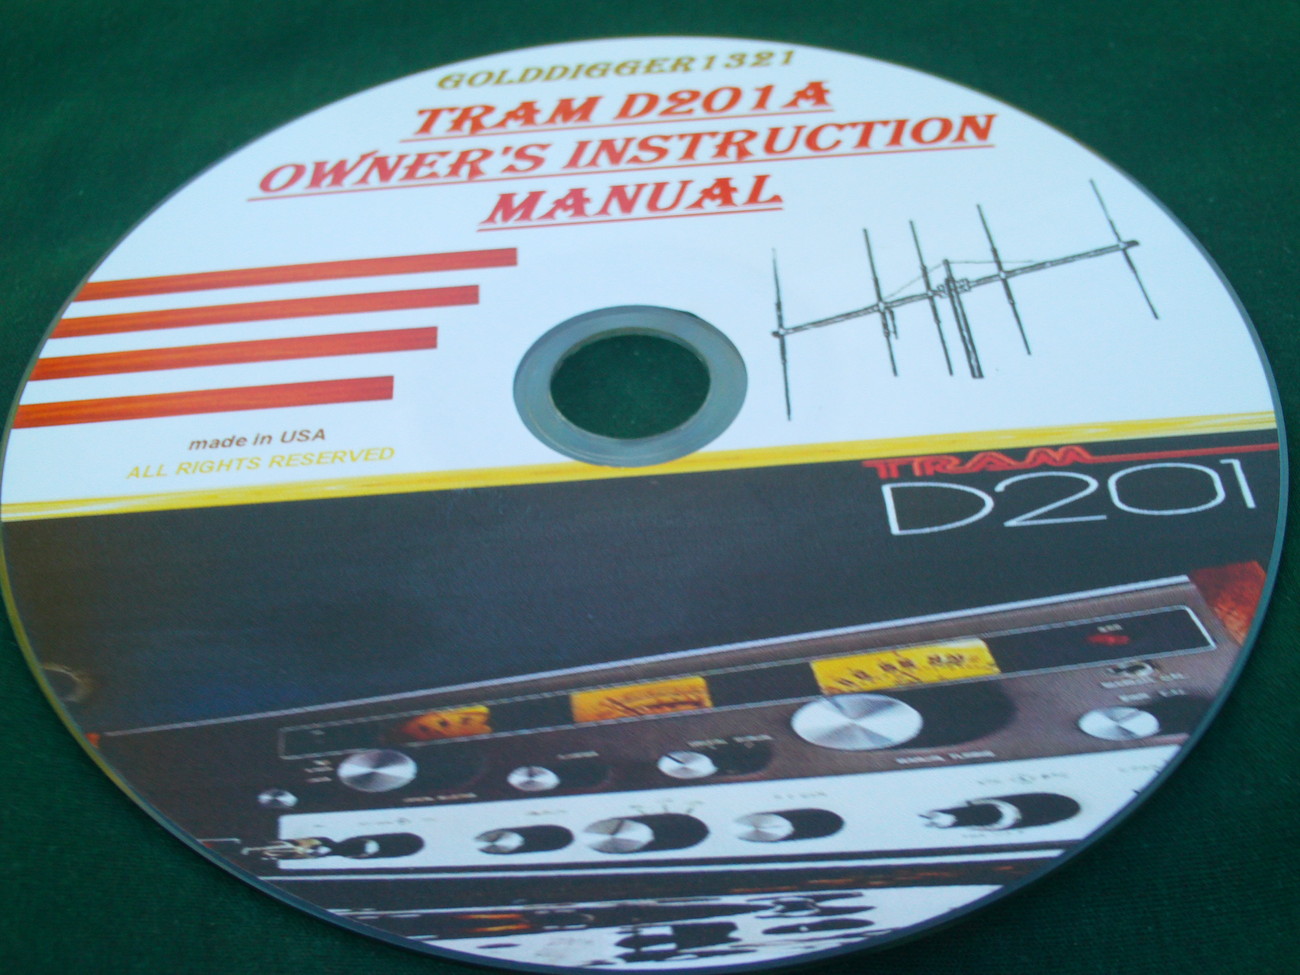 TRAM D201A OWNER'S INSTRUCTION MANUAL ON CD - $10.00